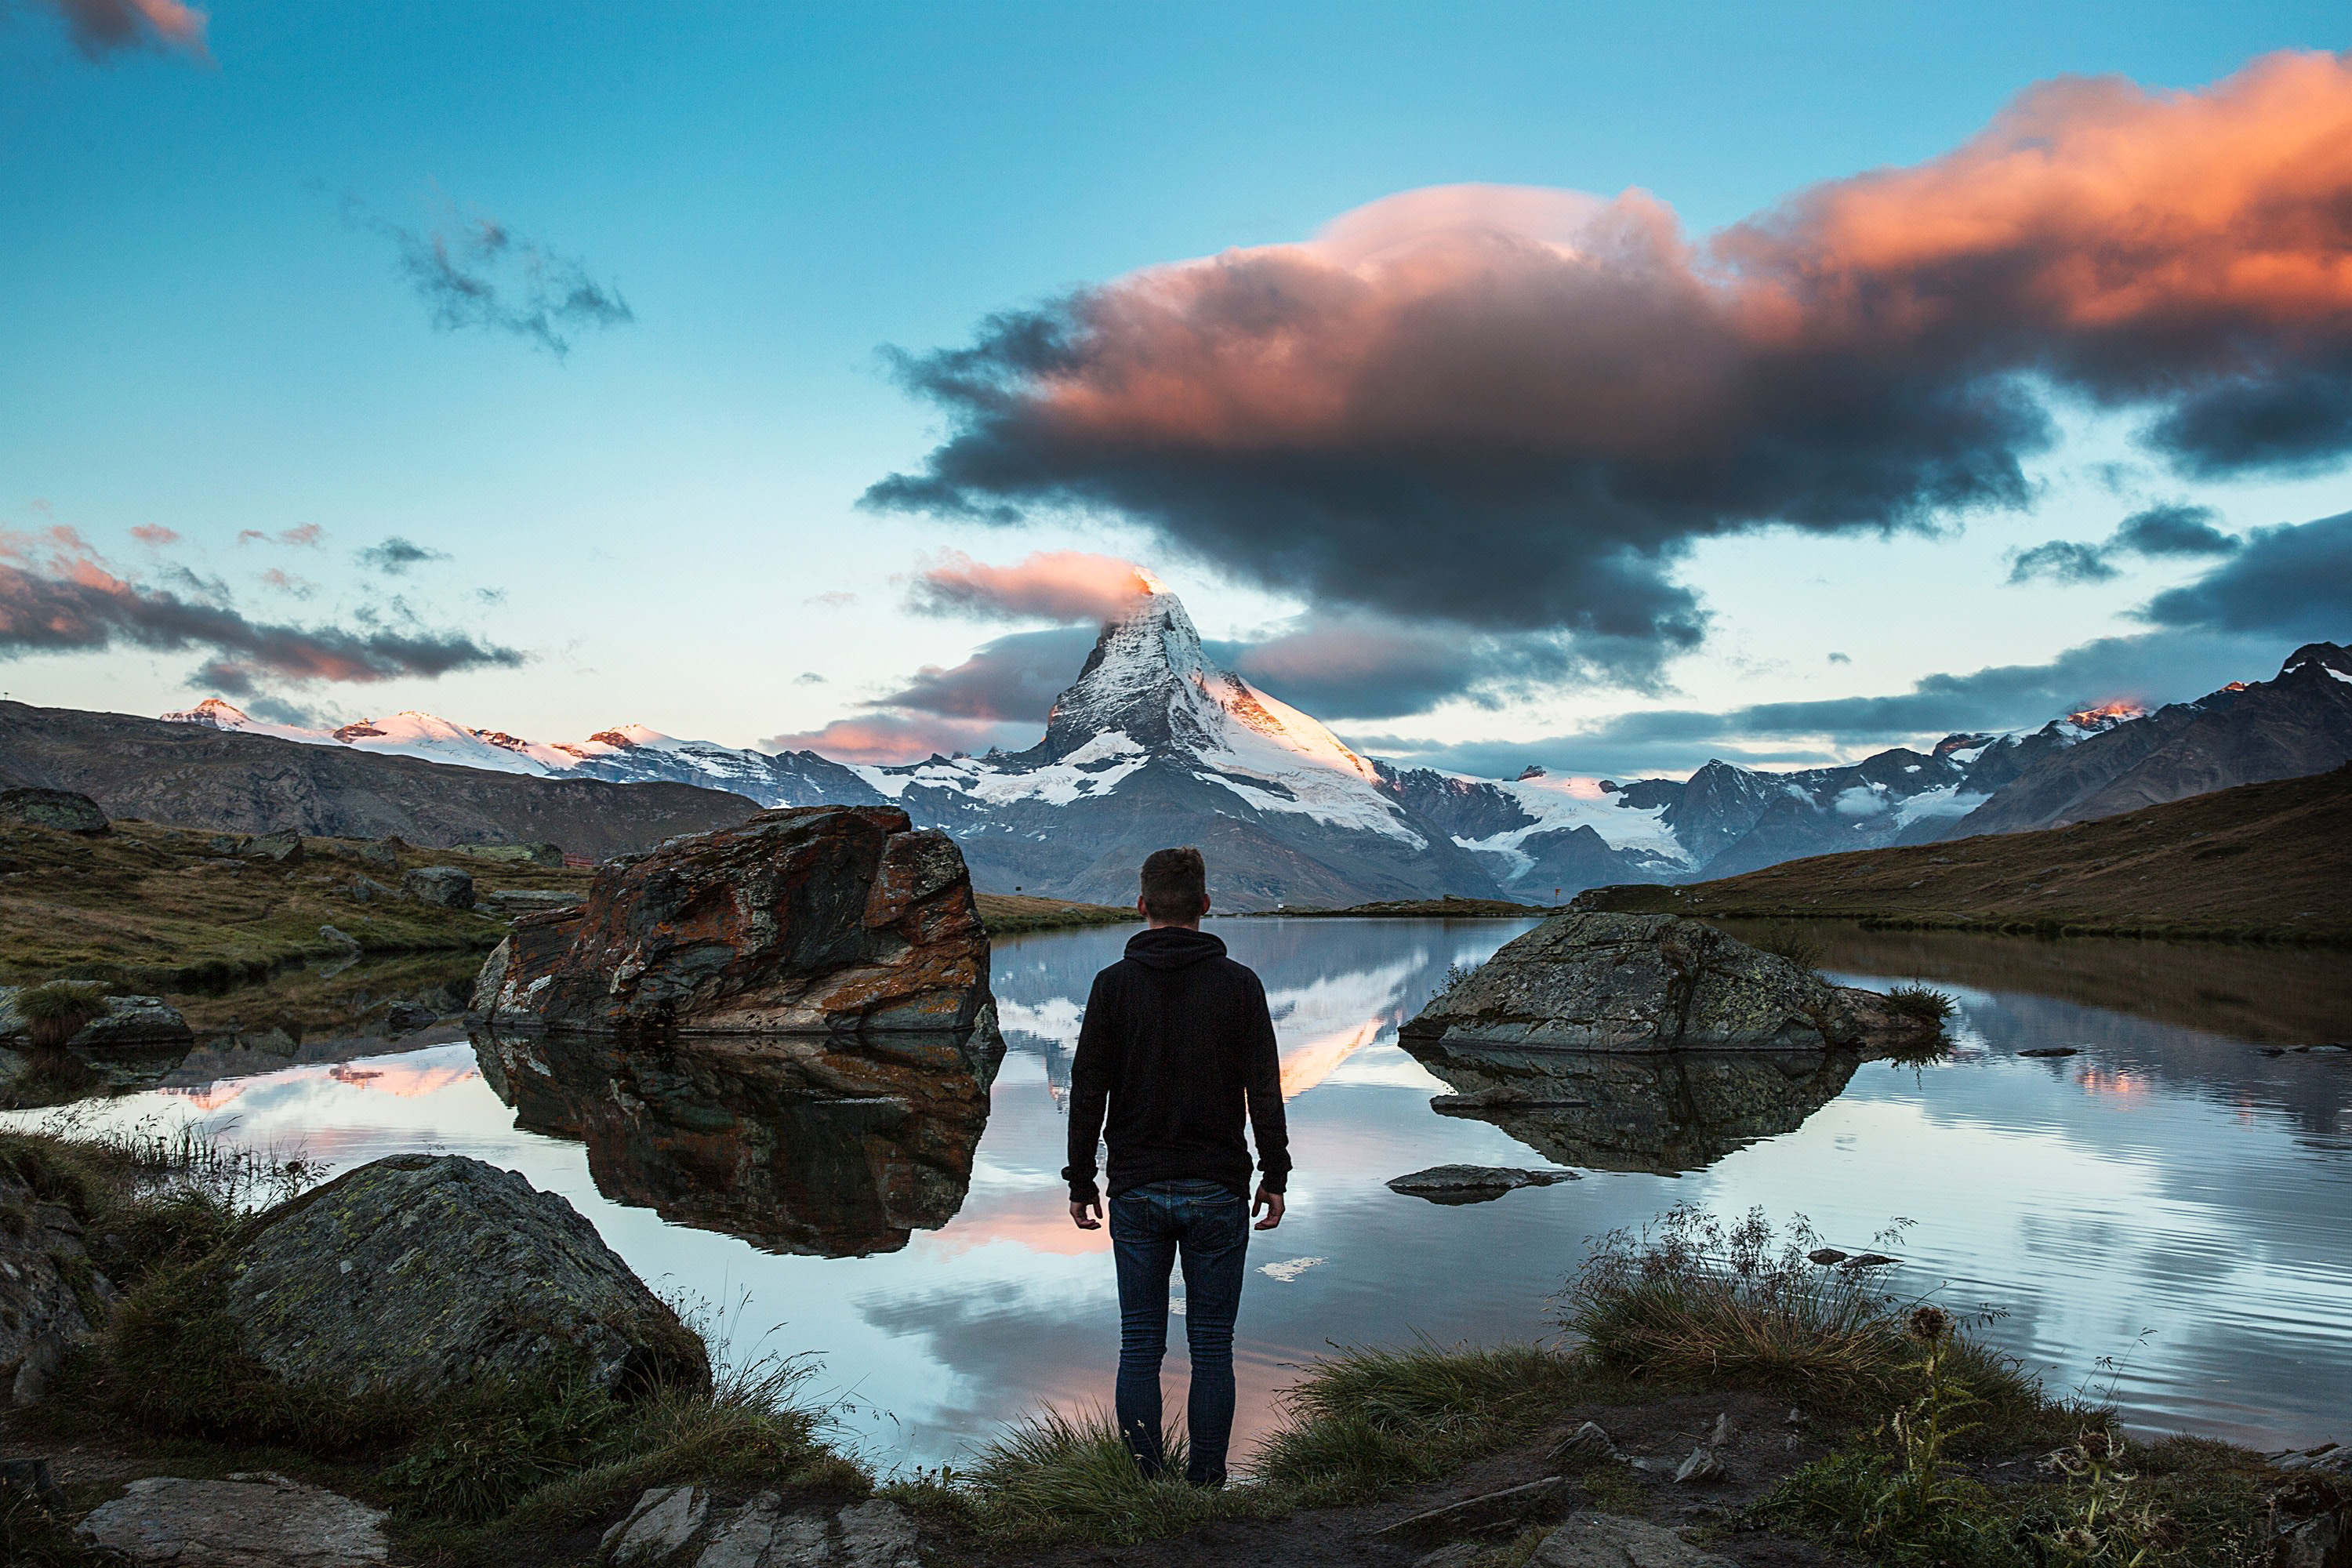 Person Looking at Beautiful lake and mountains landscape in Switzerland image - Free stock photo ...